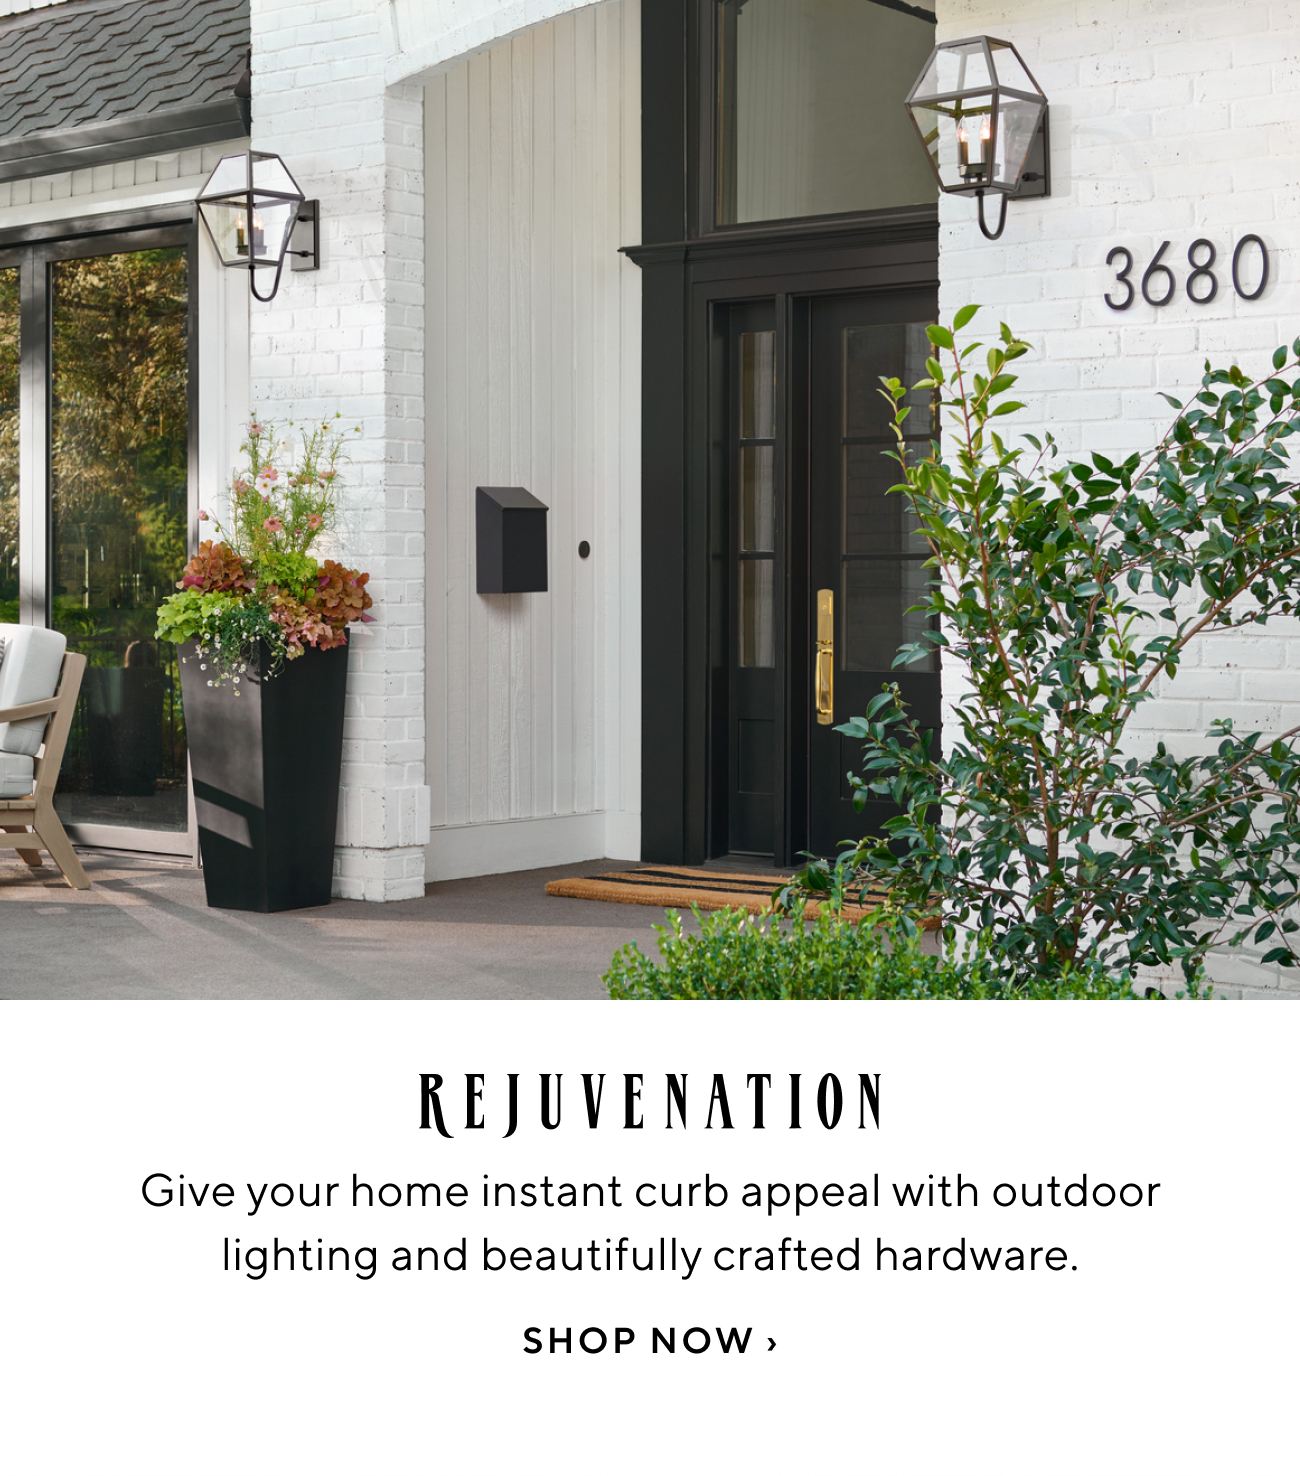  REJUVENATION Give your home instant curb appeal with outdoor lighting and beautifully crafted hardware. SHOP NOW 